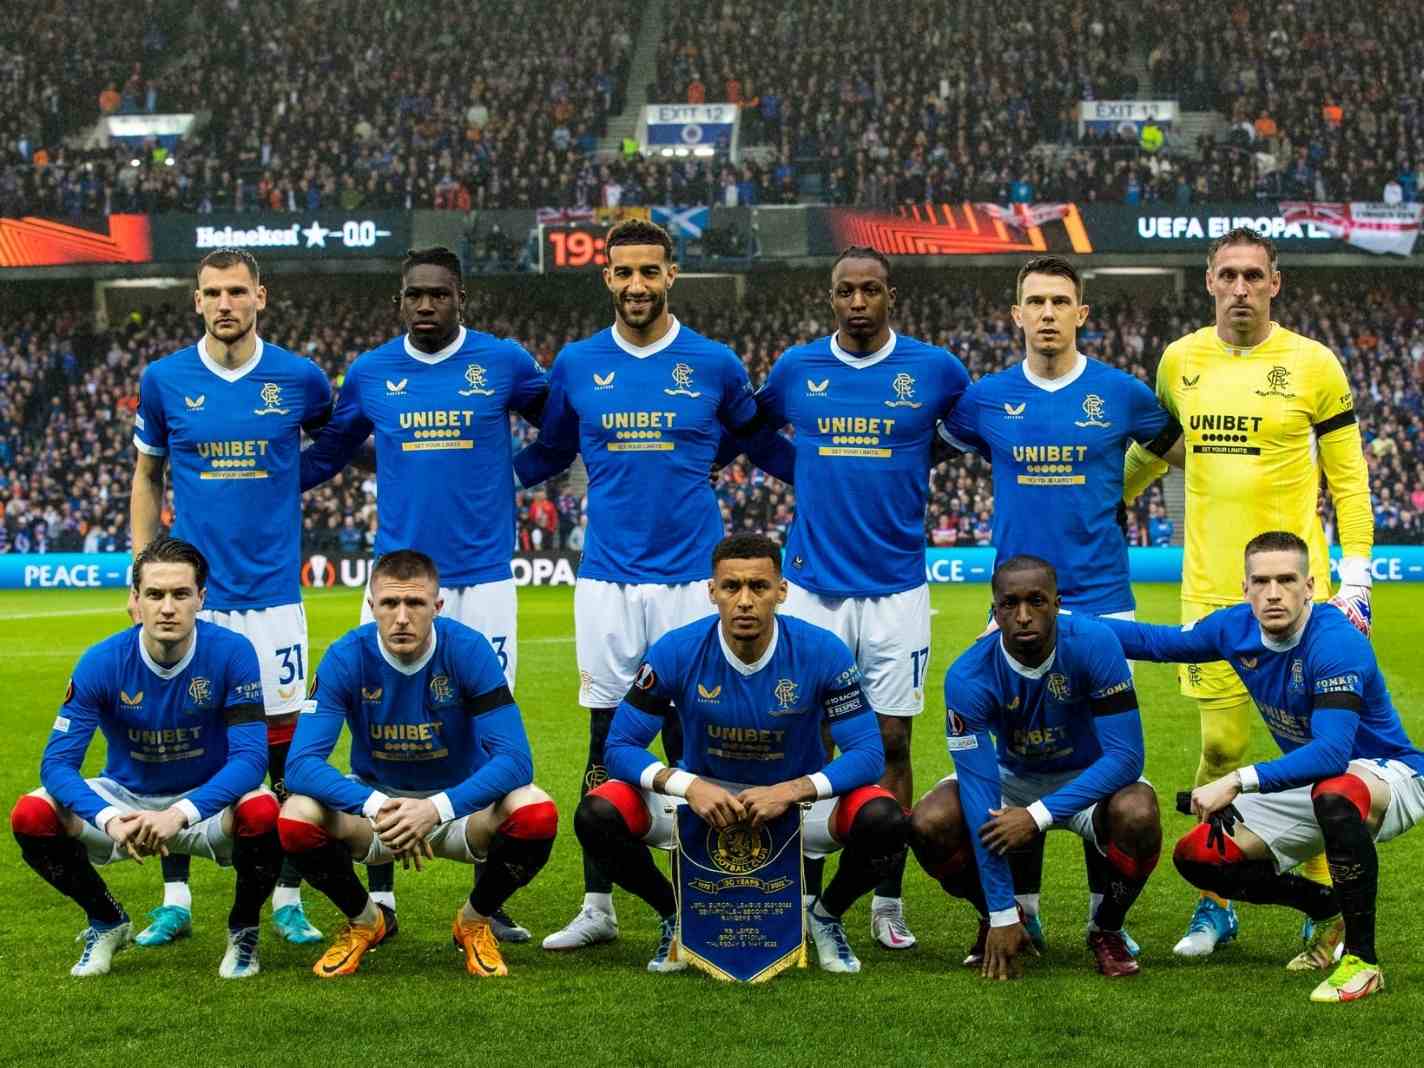 The photo shows the Rangers starting XI before their Europa League semi final against RB Leipzig